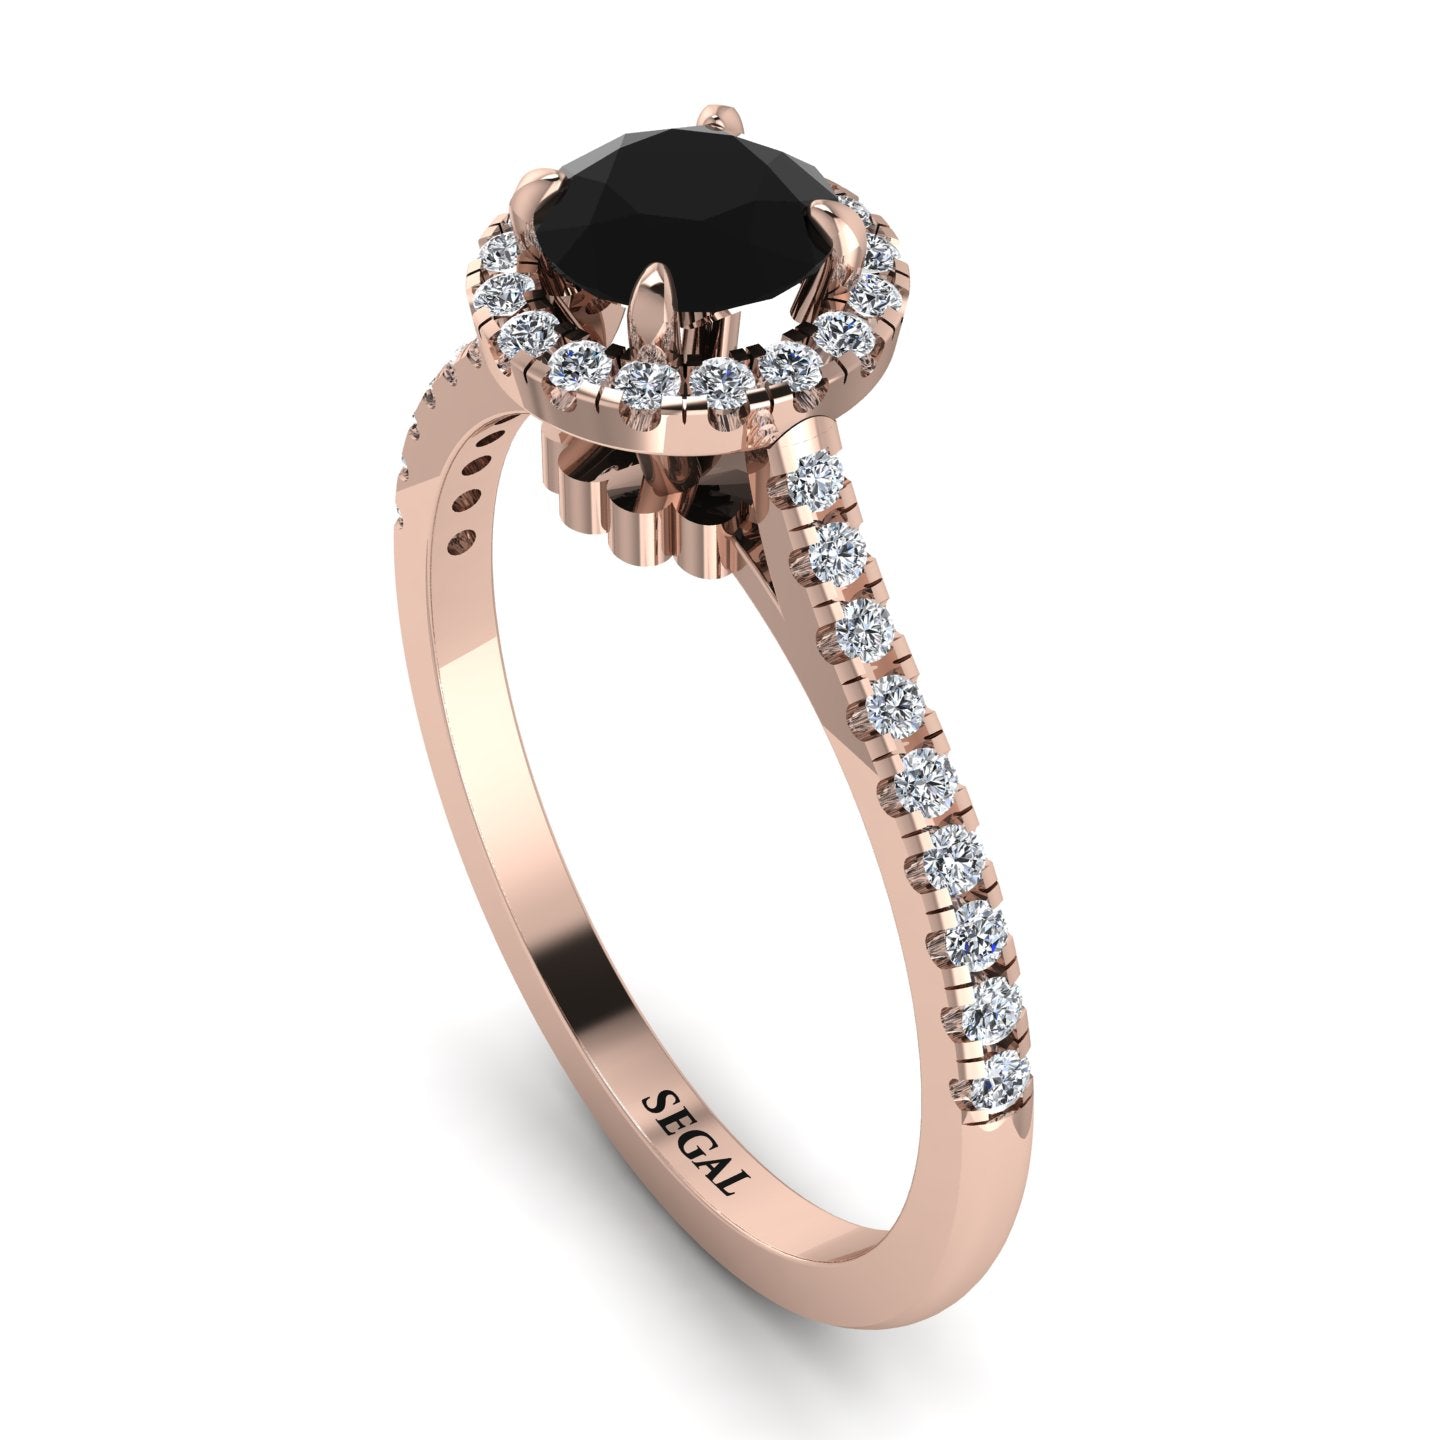 Buy Black Diamond Ring Designs Online in India | Candere by Kalyan Jewellers